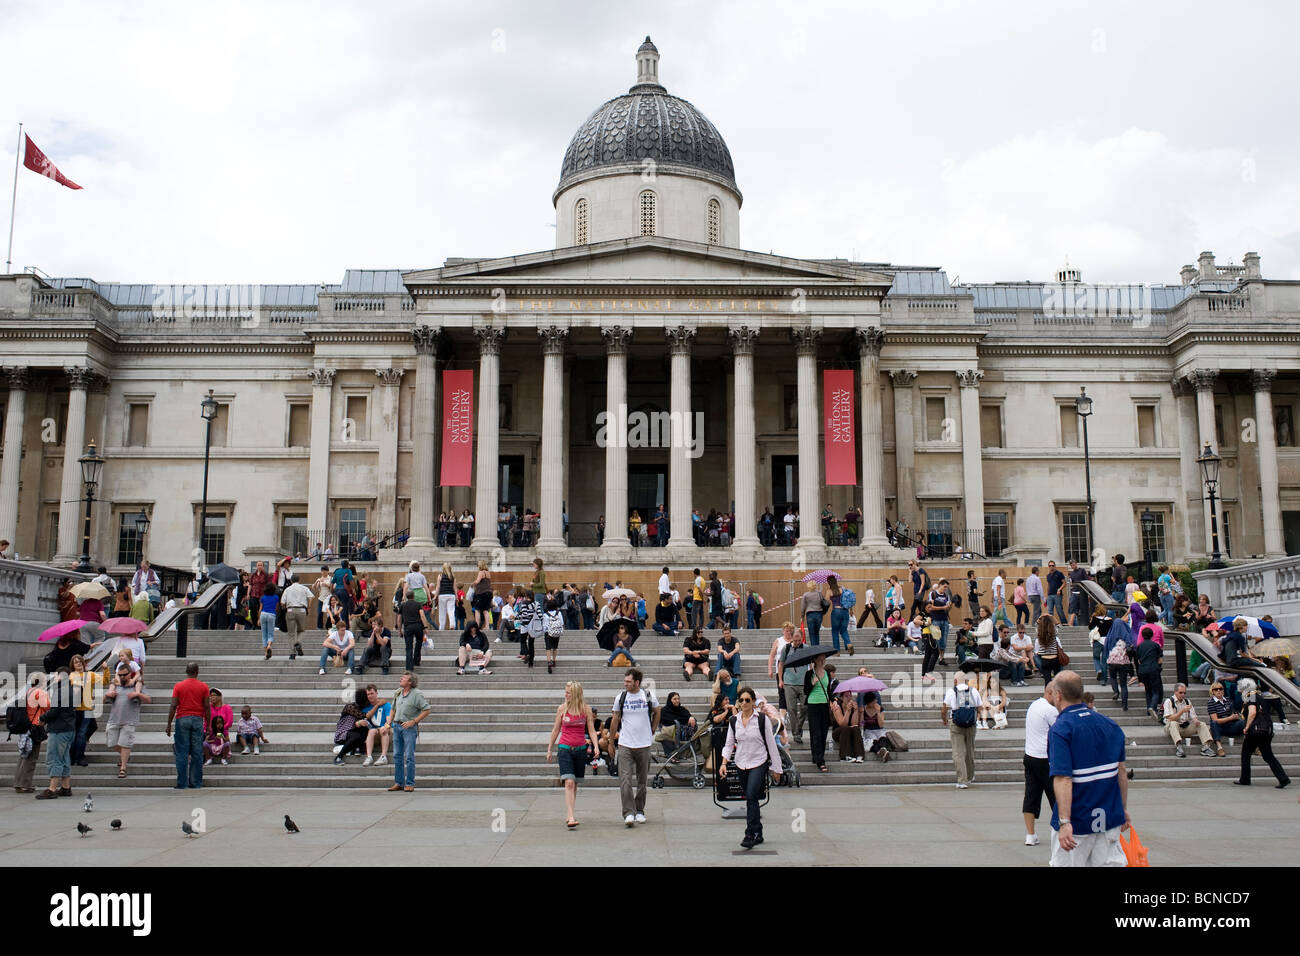 The National Gallery in London , England, viewed from Trafalgar Square. Stock Photo